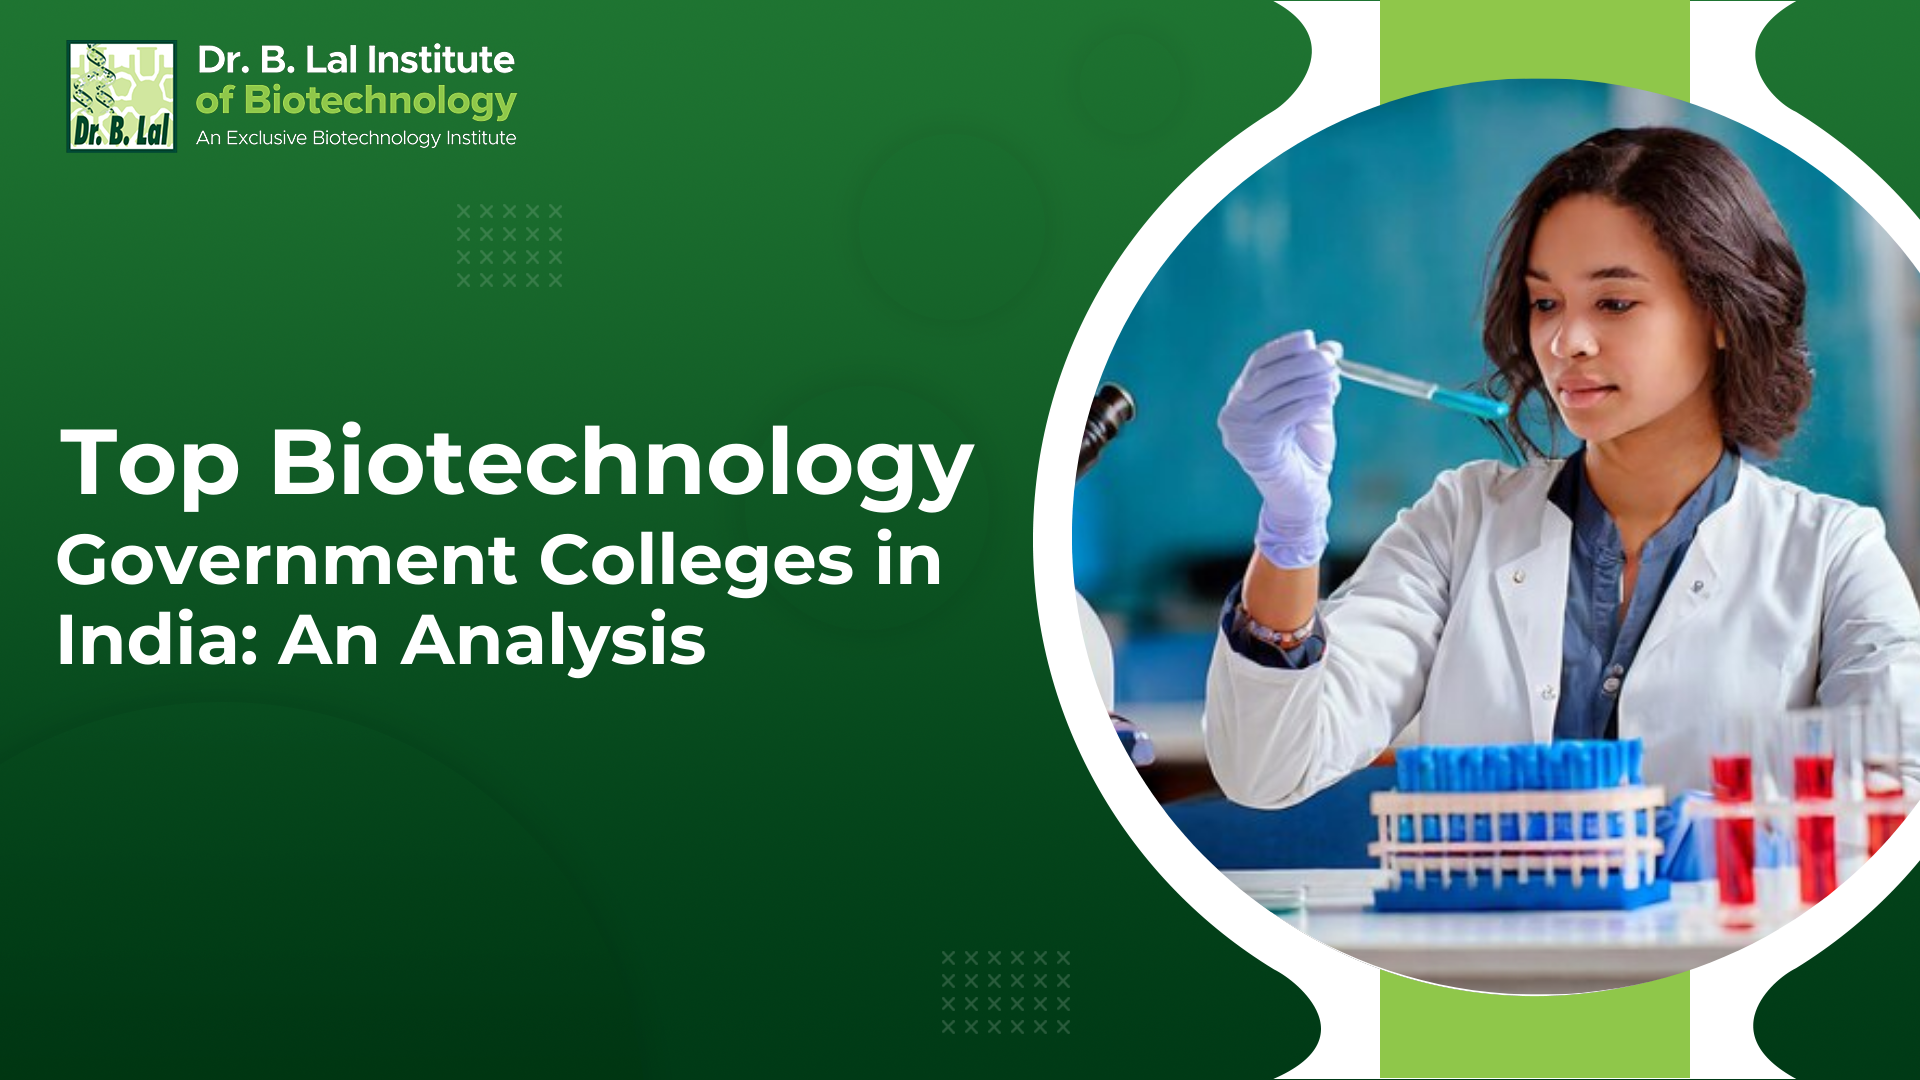 Top Biotechnology Government Colleges in India: An Analysis